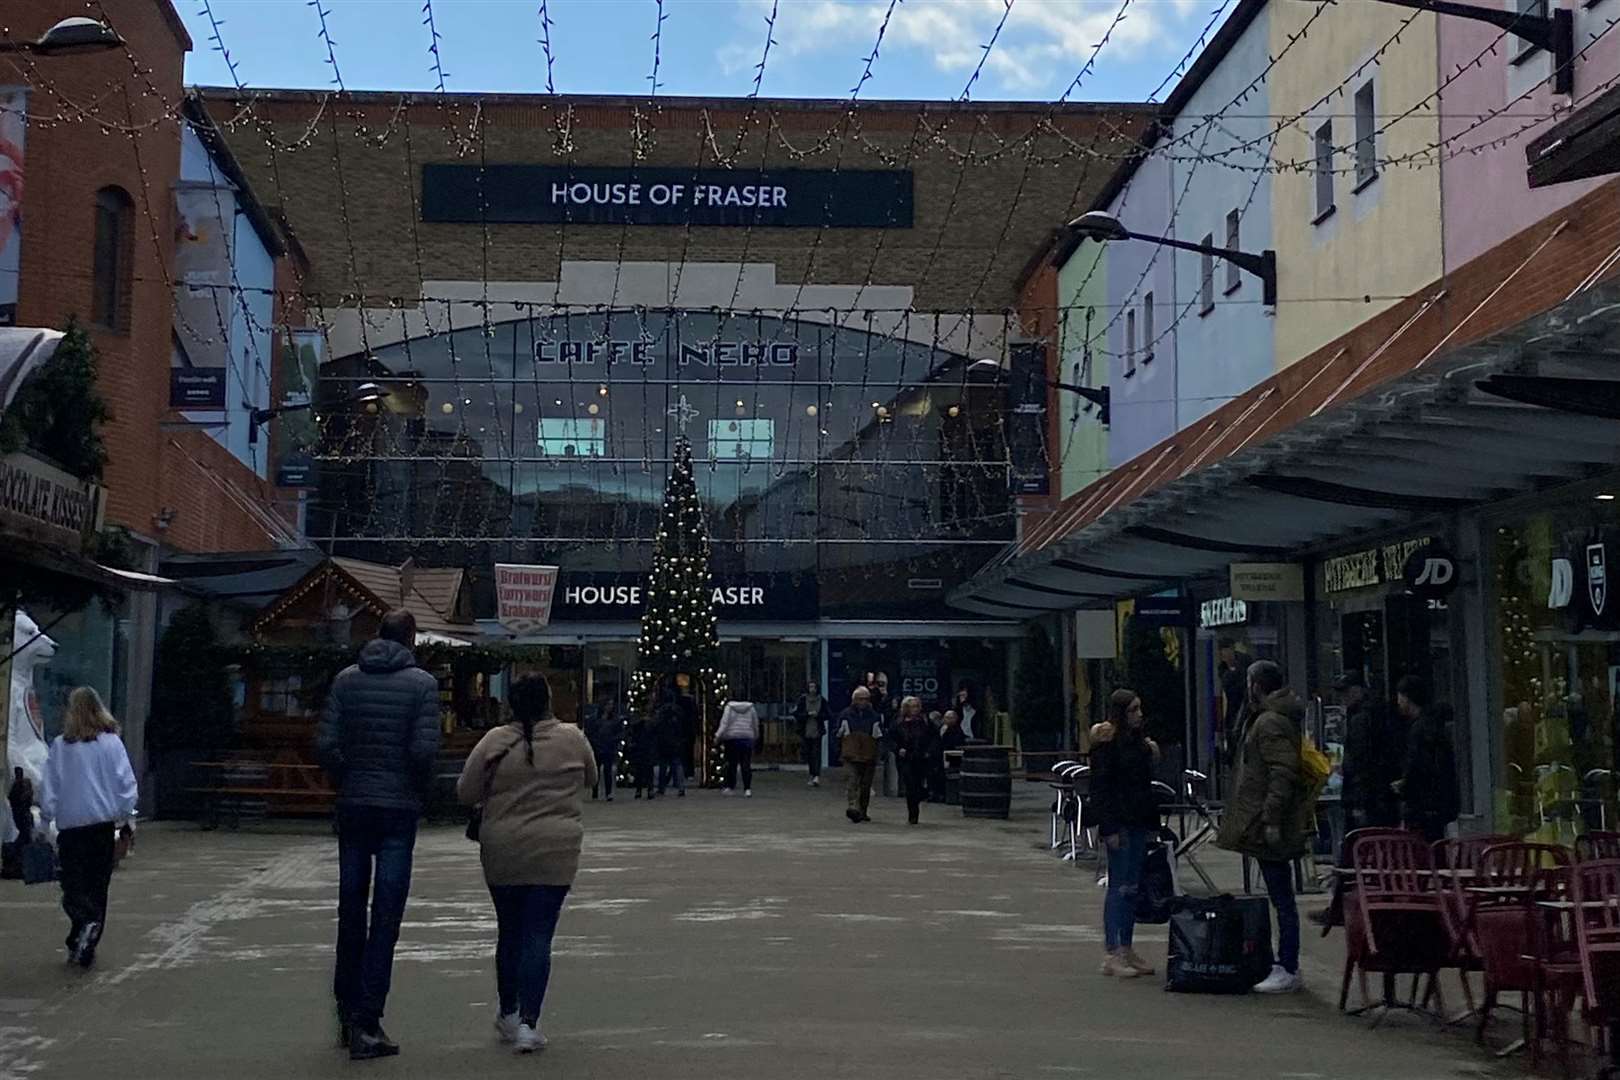 Fremlin Walk is an outdoor shopping centre in Maidstone